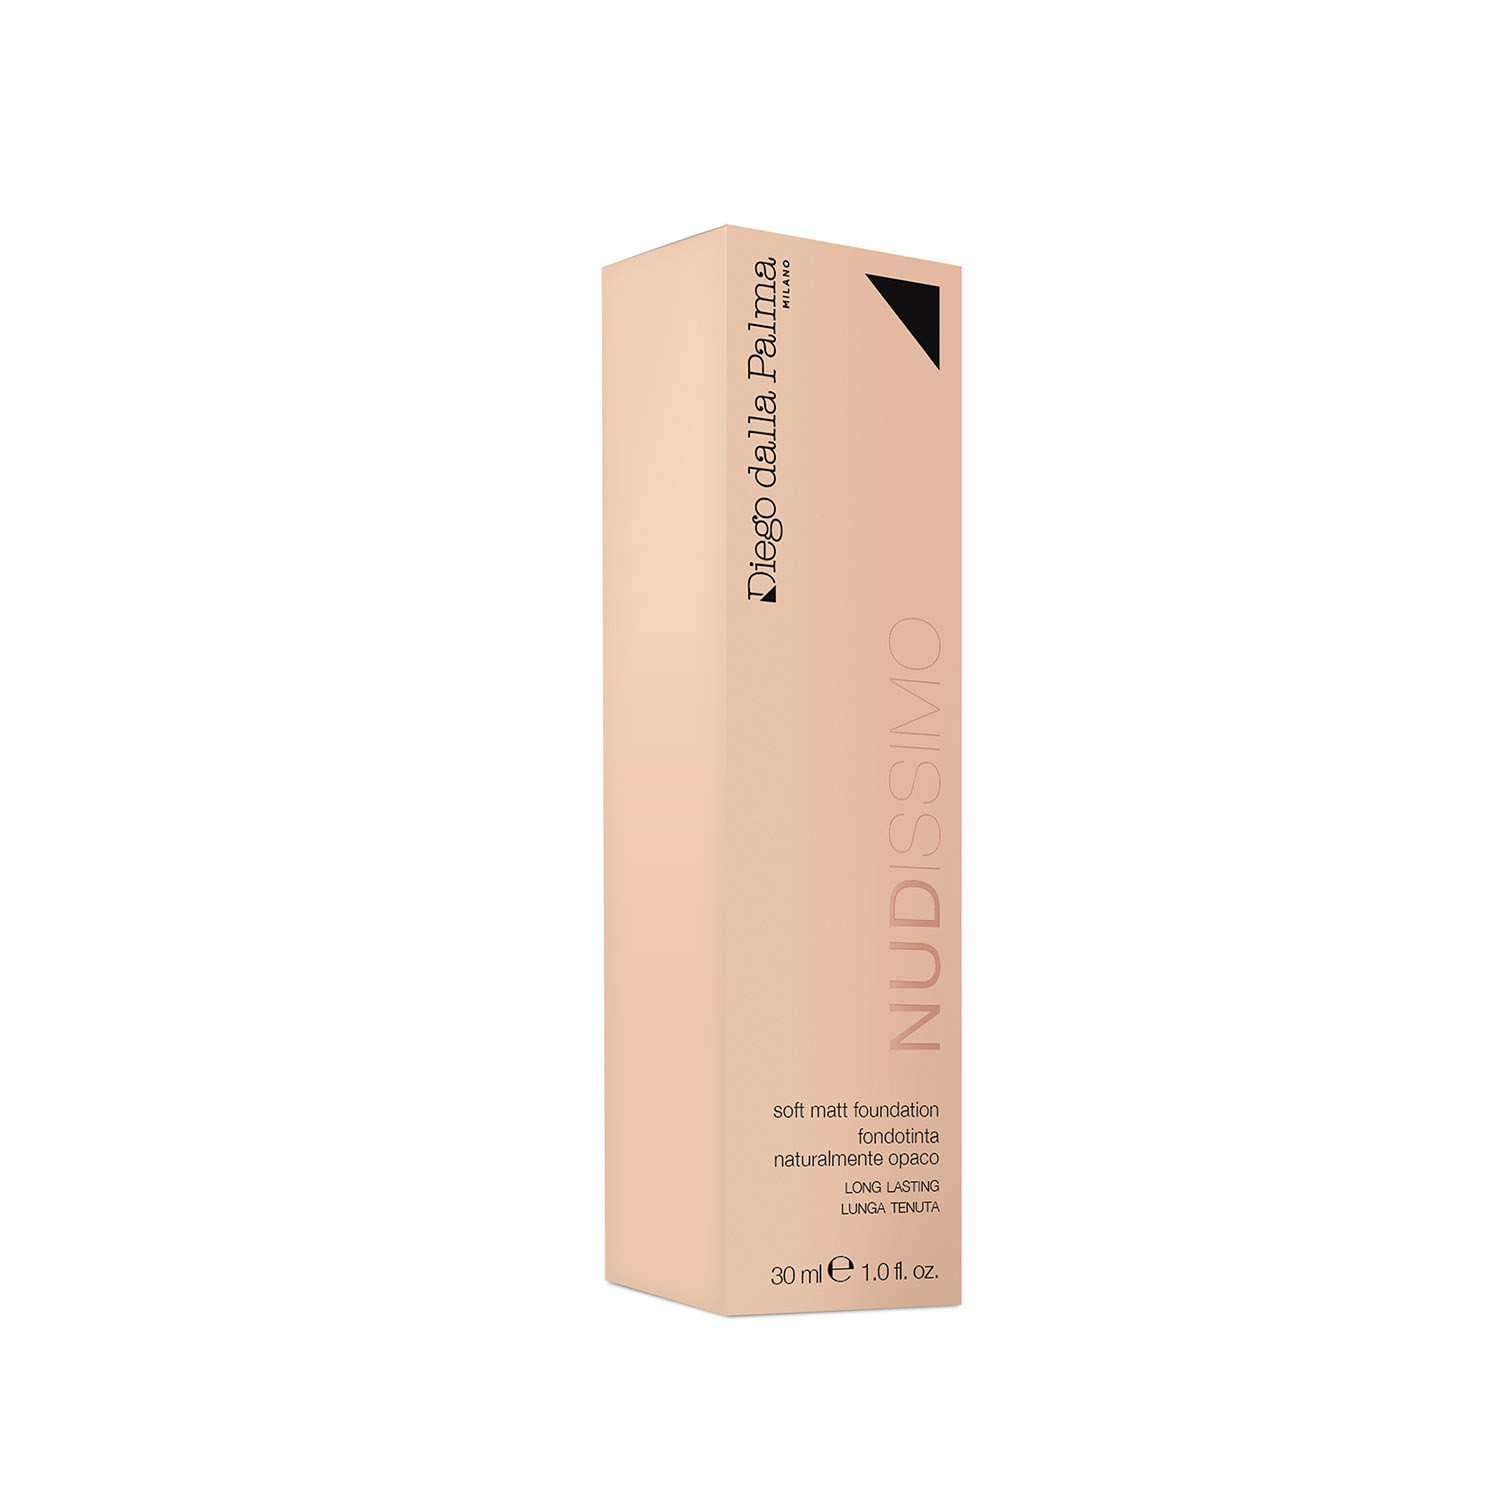 NUDISSIMO Naturally Matt Foundation - 249W, Bronze Brown, large image number 2